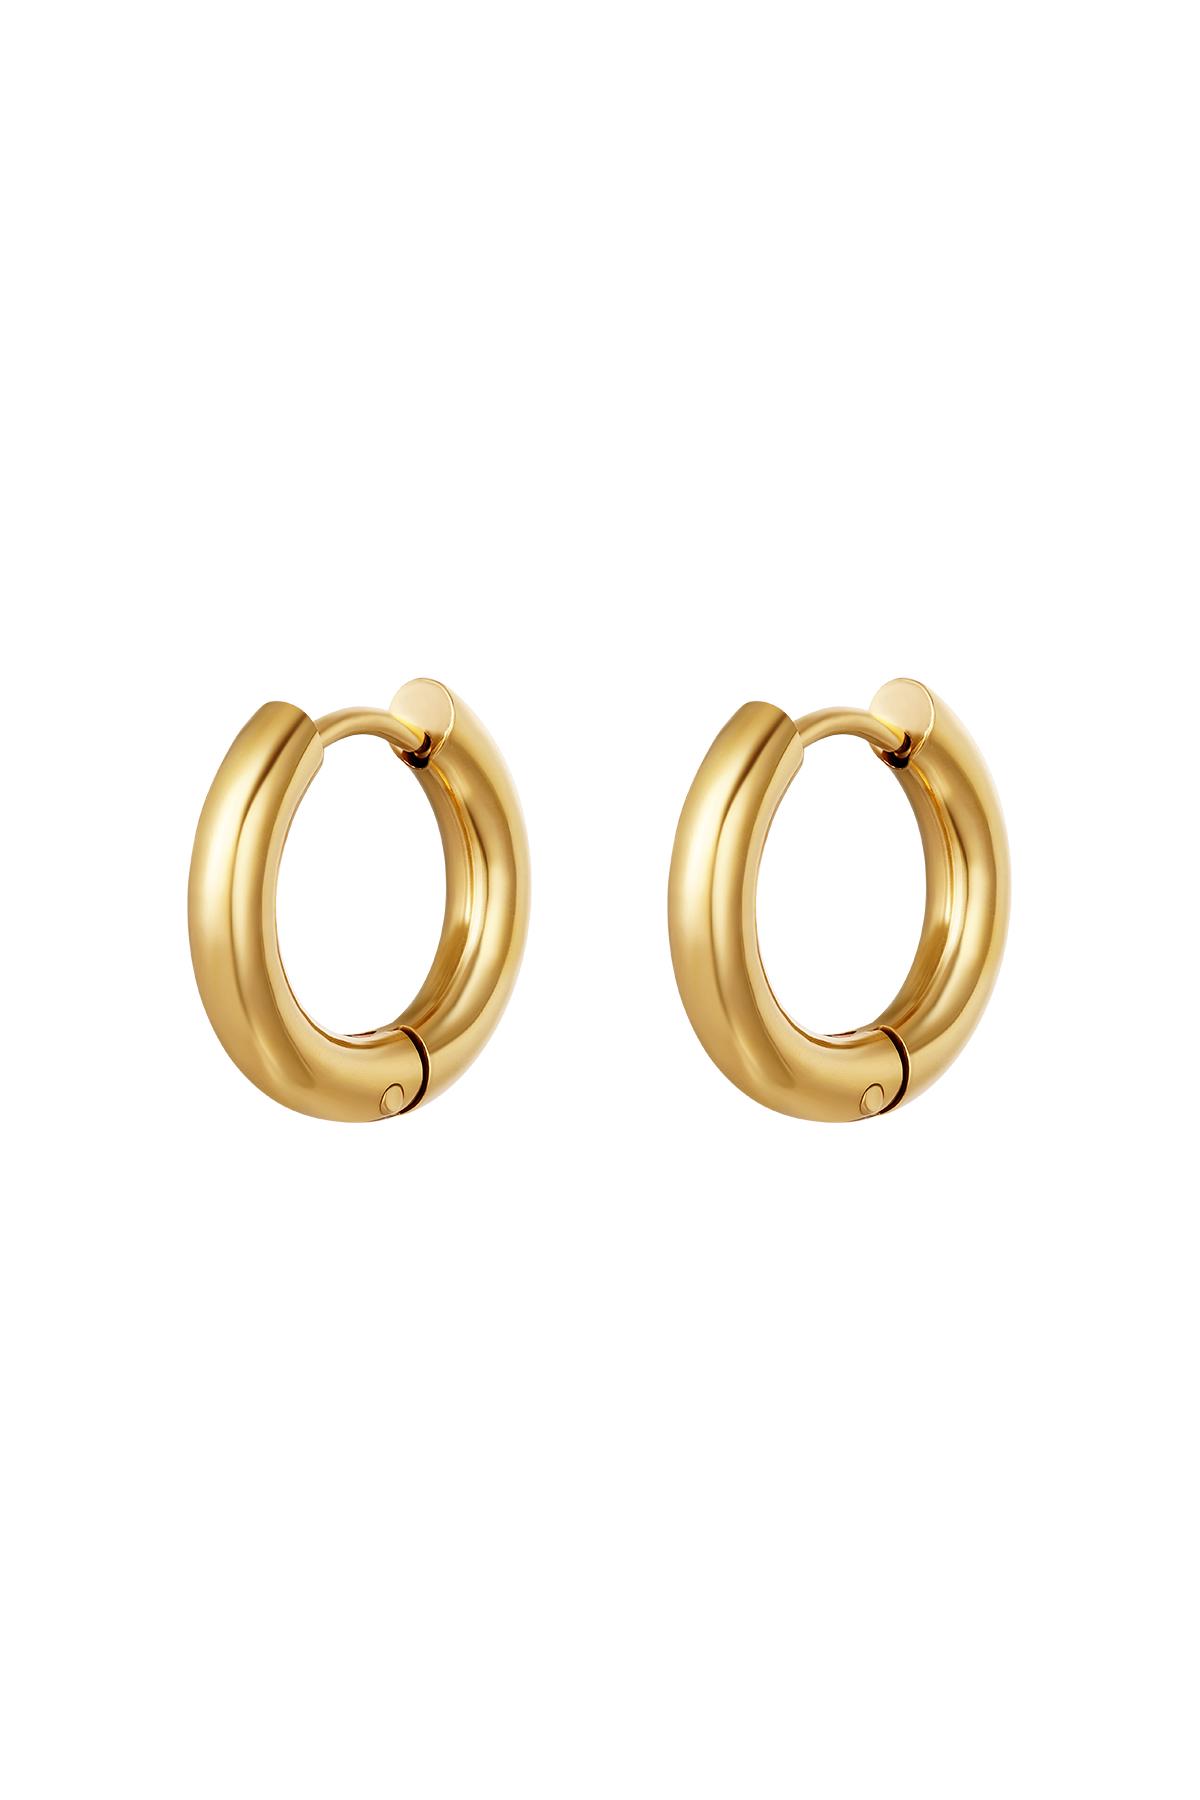 Basic creoles earrings - small Gold Stainless Steel